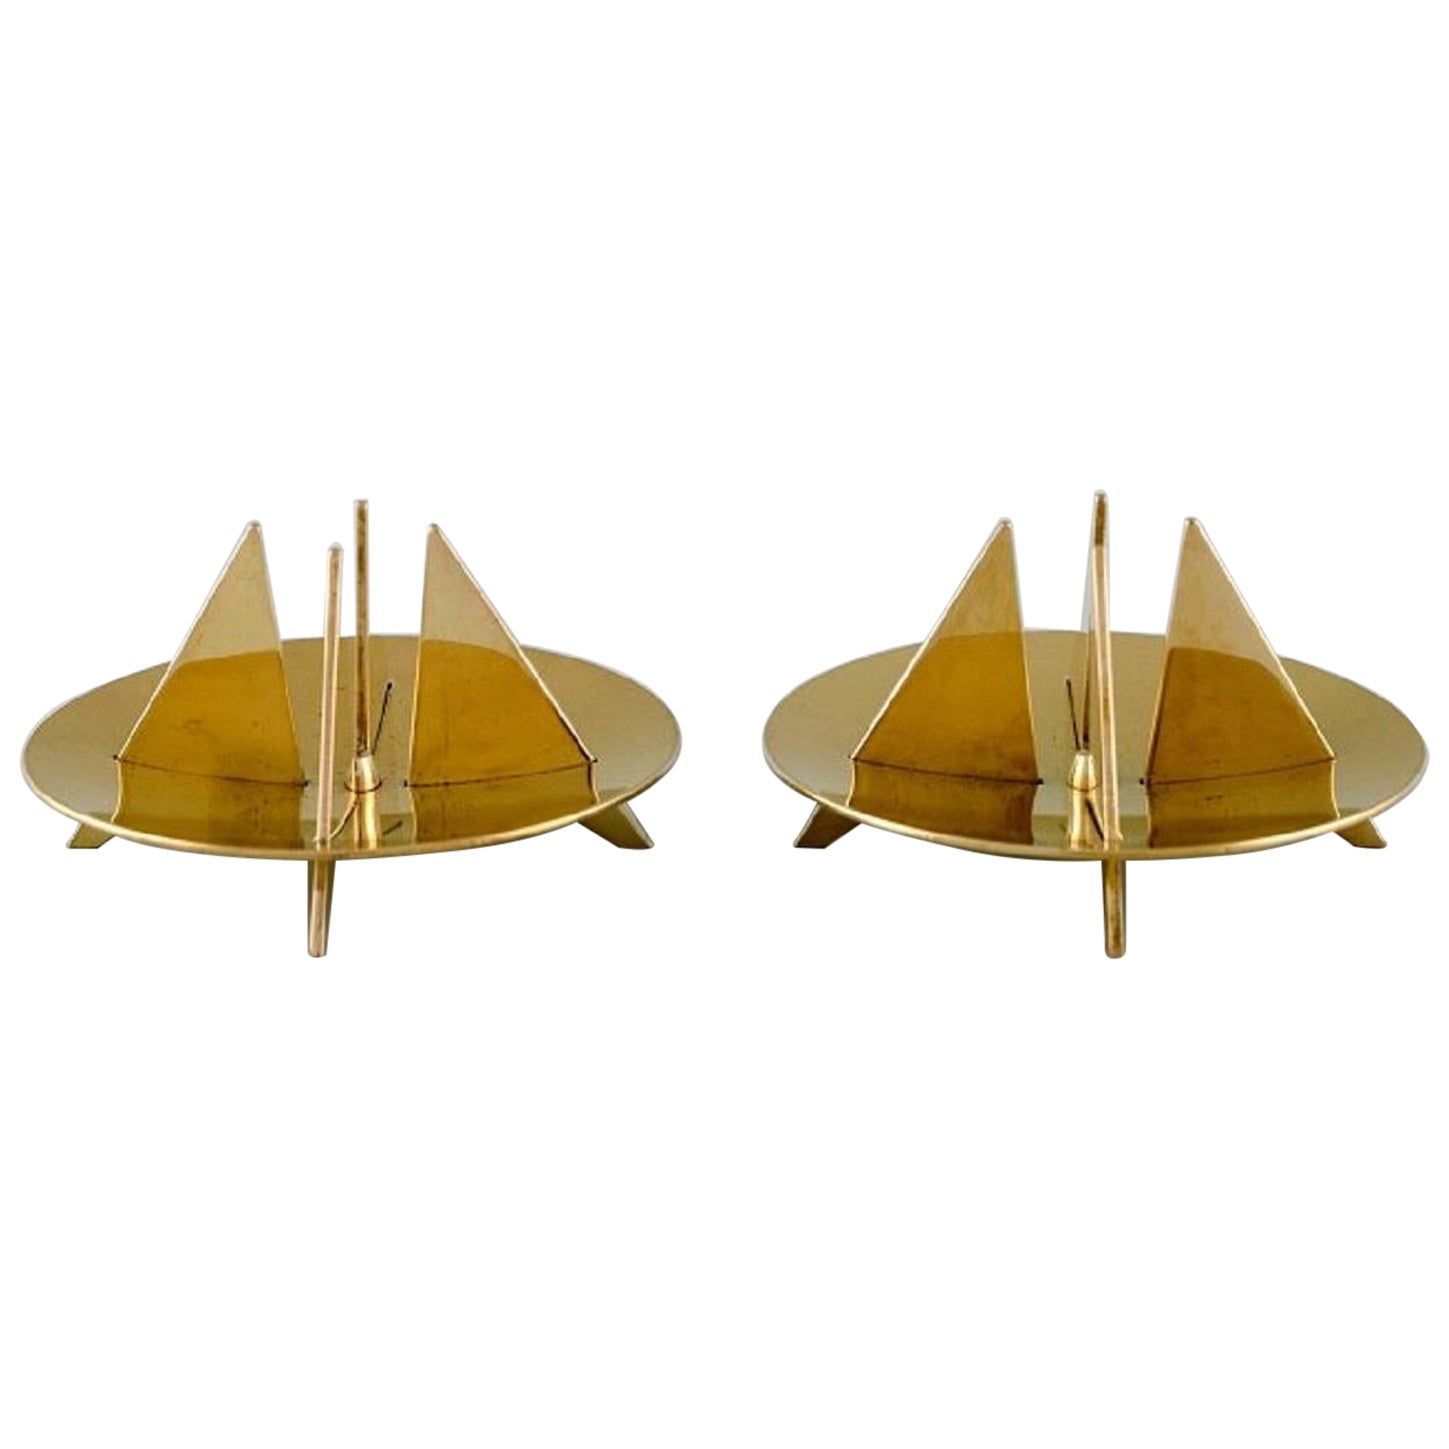 Pierre Forsell for Skultuna, a Pair of Sculptural Candlesticks